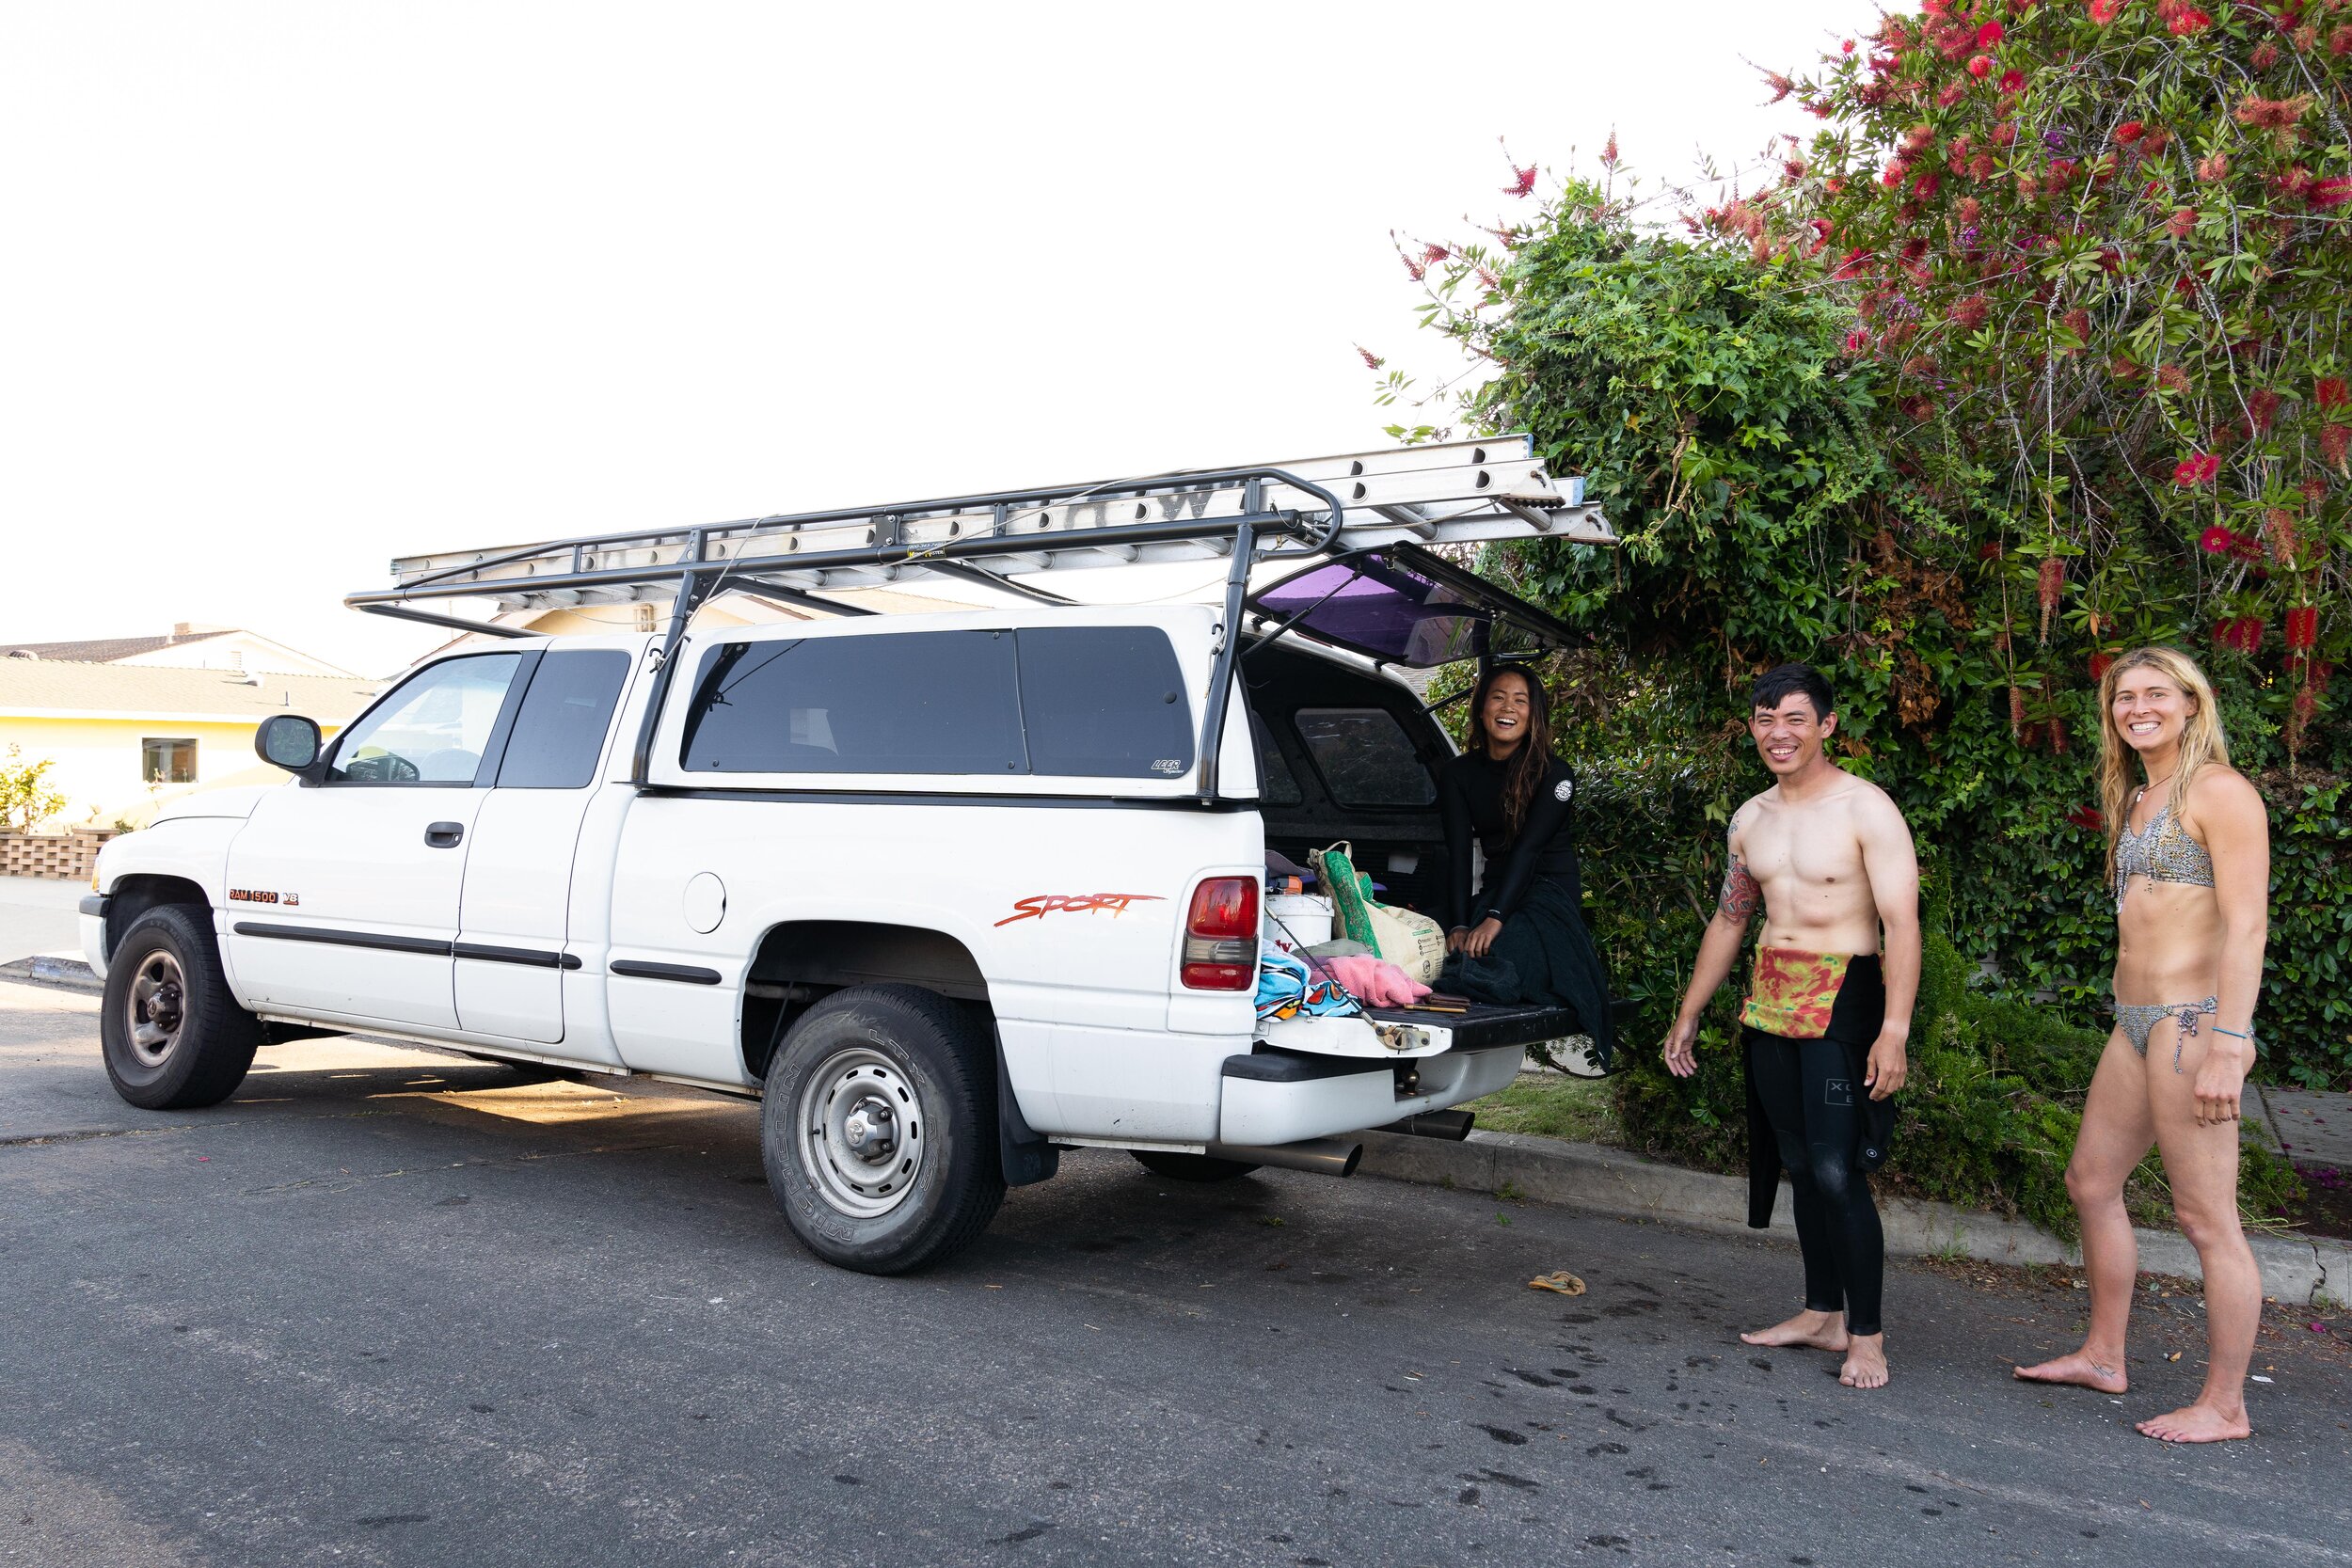  “It’s our adventure vehicle, work vehicle, fun vehicle, everything vehicle really. Today she faithfully served as surfing transport once again.” - Arthur (Xenia, Arthur, Lindsay) | 05/05/20 (San Diego, CA) 